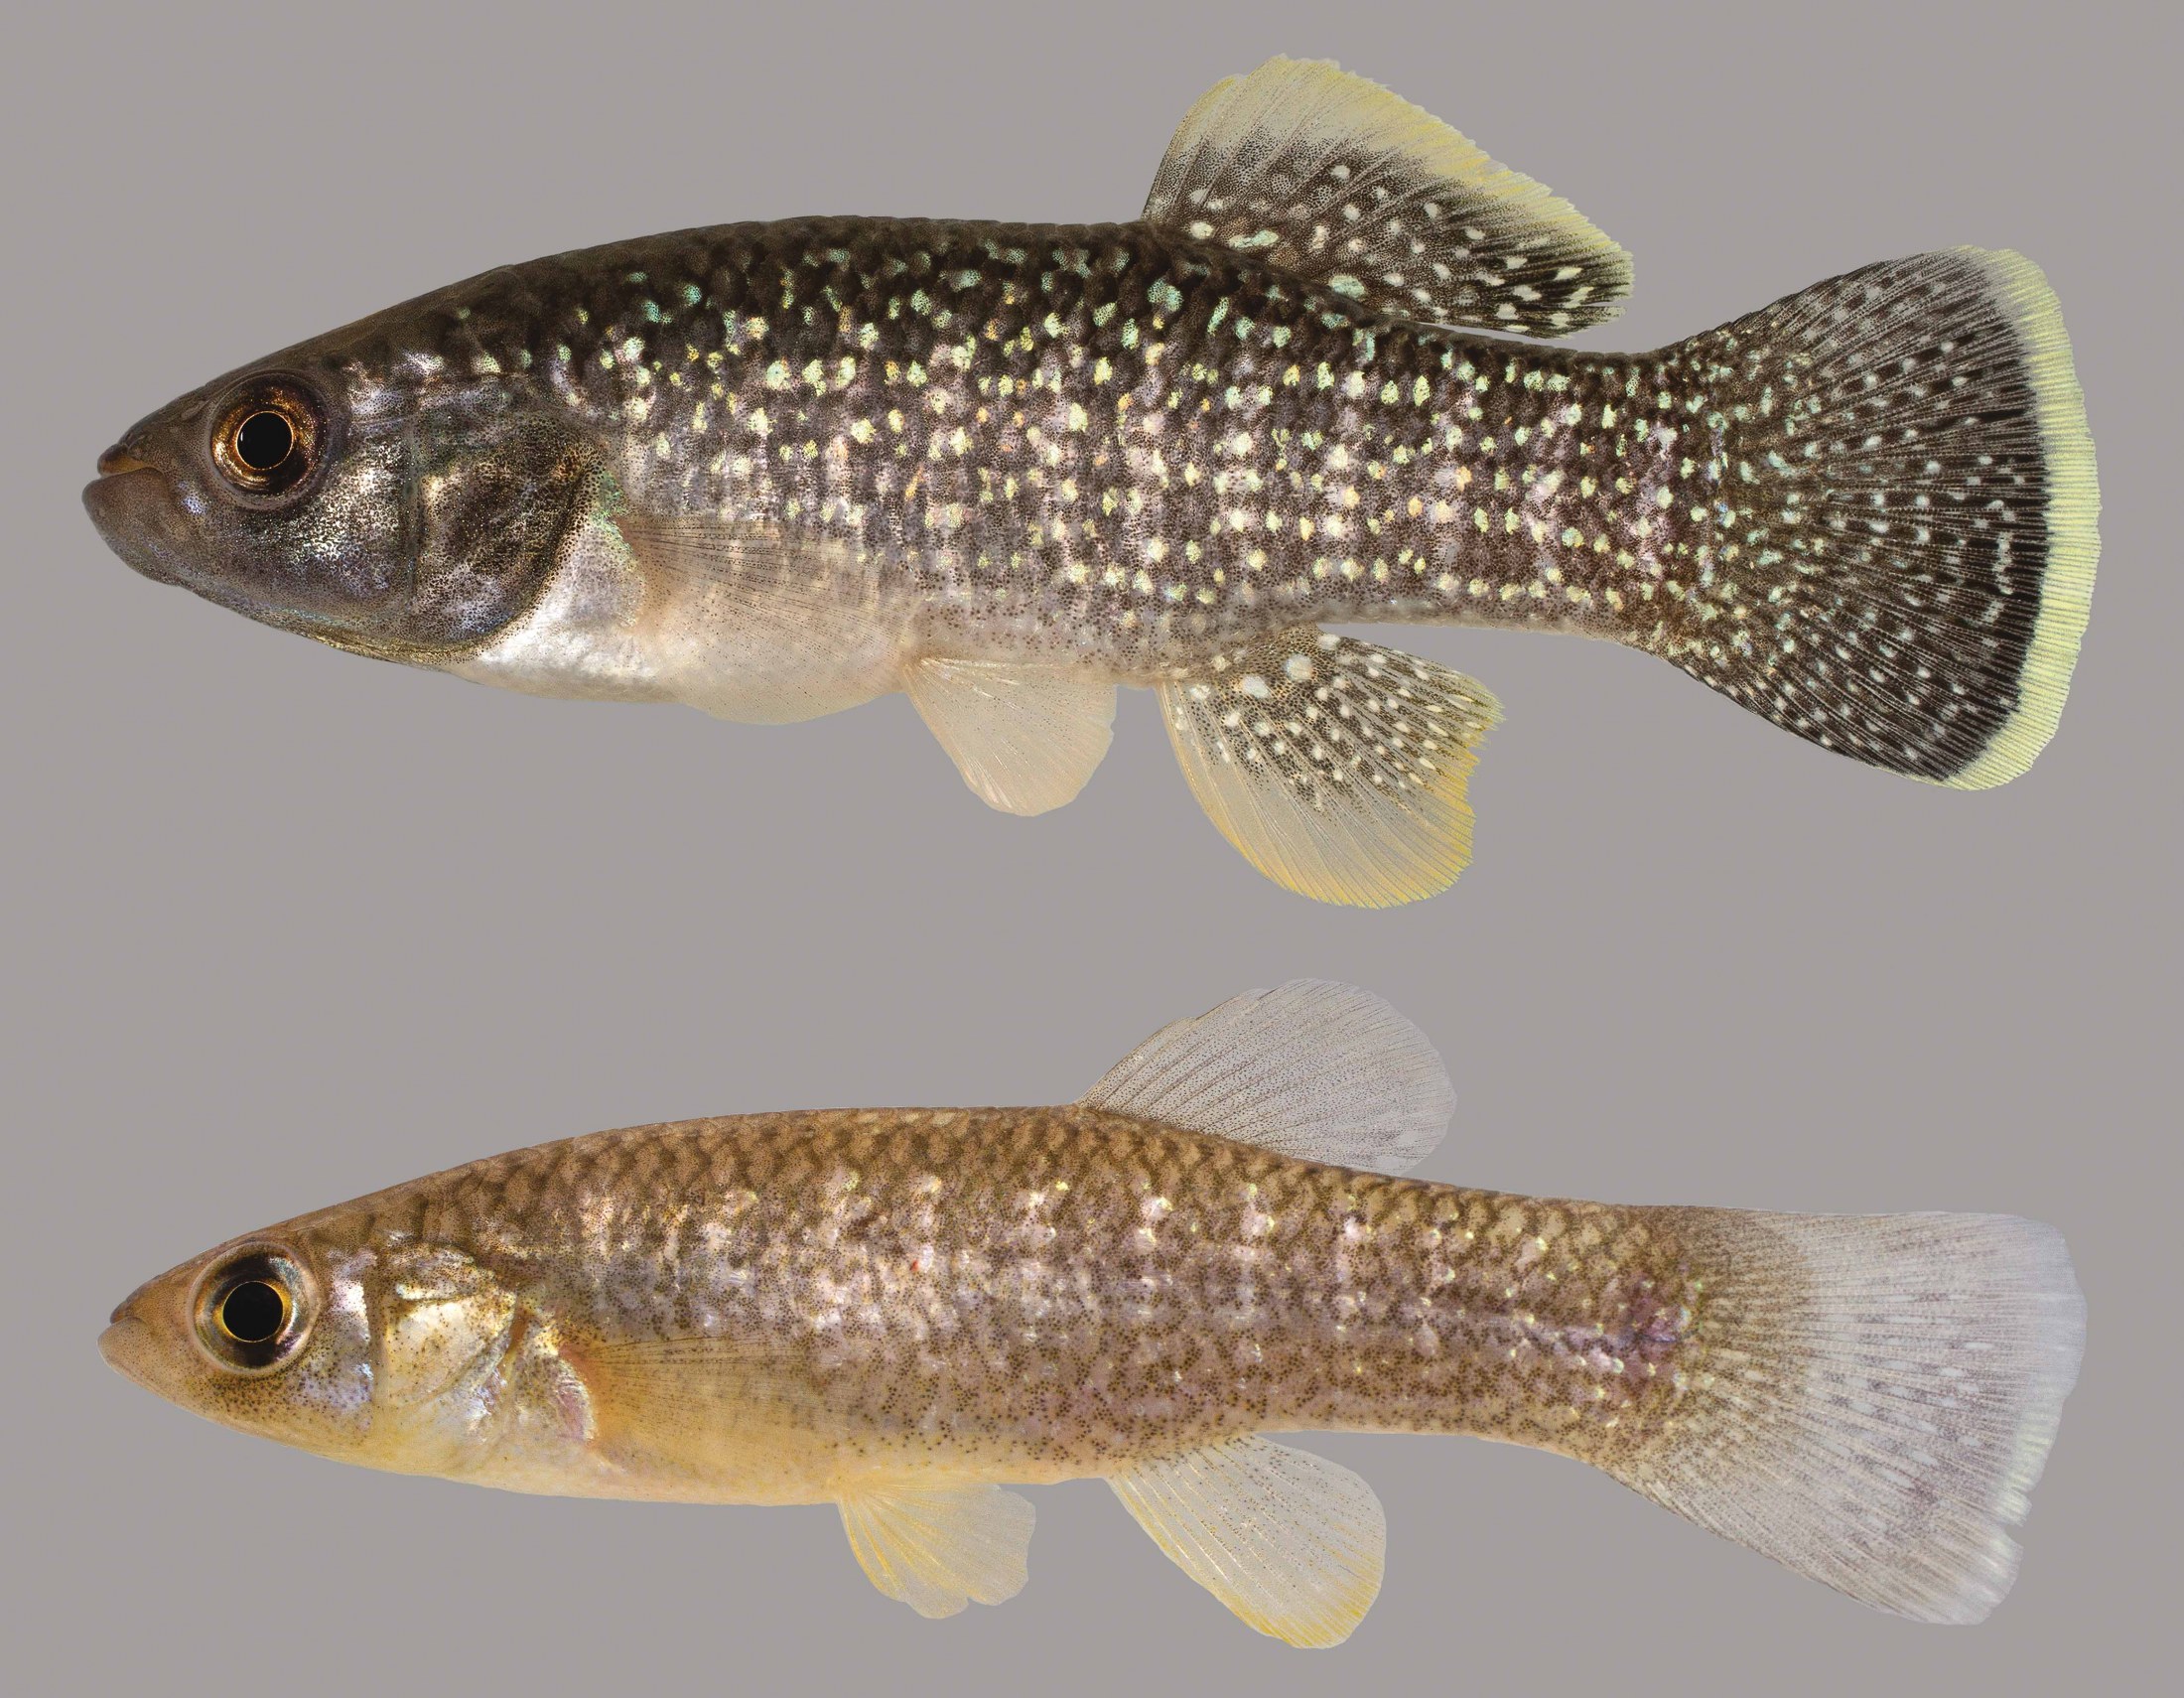 Lateral view of Gulf killifish